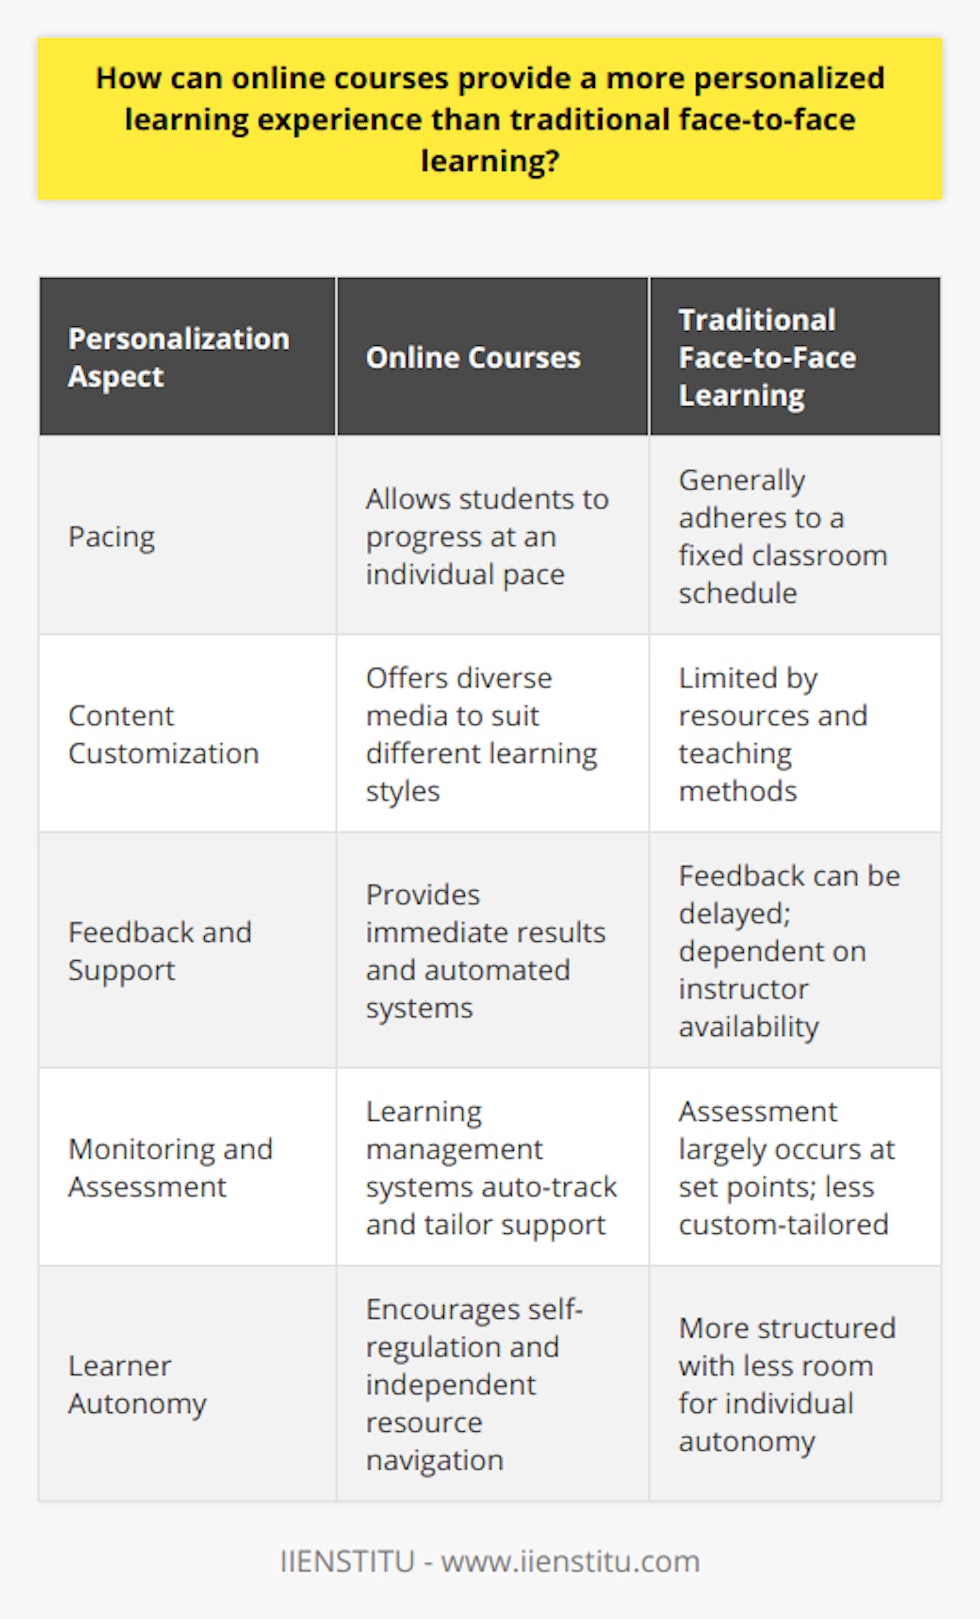 Online courses are transforming the educational landscape by offering unprecedented levels of personalization and adaptability to learners, which can be difficult to achieve in traditional face-to-face settings. This tailored approach to education is not merely about convenience but about structuring learning in a way that aligns with each individual's unique requirements, styles, and objectives.One of the most significant advantages of online courses is the ability for learners to set their own pace. This flexibility allows students to spend more time on challenging subjects and breeze through topics they grasp quickly, leading to a more efficient learning process tailored to their personal learning rhythms. This contrasts with traditional classroom settings, which typically follow a fixed schedule that cannot accommodate every student's learning speed or external commitments.The capacity for content customization in online courses is another factor that enhances the personalized learning experience. Diverse multimedia content—such as interactive videos, podcasts, infographics, and e-books—can address various learning preferences, including auditory, visual, kinesthetic, and reading/writing preferences. Through learning analytics, instructors can understand which types of content are most effective for each learner and adjust the curriculum to maximize engagement and comprehension.The immediacy of feedback and support that online learning offers is another area where it stands out. Tools such as quizzes with instant results and automated grading systems provide learners with immediate insight into their understanding of the material. This quick turnaround can make the learning process feel more iterative and dynamic, allowing students to quickly adapt their study strategies based on real-time feedback.Regarding individualized monitoring and assessment, learning management systems used in online courses can automatically track a learner's progress, time spent on tasks, and areas for improvement. Such insights enable educators to offer a more nuanced and personalized response to learner needs, supplementing the learning journey with targeted support, additional resources, or alternative pathways to understanding difficult concepts.Furthermore, online courses encourage learner autonomy and self-regulation by placing the responsibility for learning in the students' hands. With access to a wealth of digital resources and the freedom to navigate these independently, learners can build a self-directed learning experience that is both empowering and aligned with their personal learning objectives.In essence, the personalization of the learning experience, which online courses provide, is situated in the capacity to cater to individual learning paths and preferences. It is this central principle of personalized learning that allows online education platforms, such as IIENSTITU, to create educational offerings that can accommodate the diverse and evolving needs of learners across the globe. The granularity with which online courses can be adjusted to the unique learning style and pace of each student makes them a powerful mode of education that can be particularly well-suited to the demands of modern, lifelong learners.